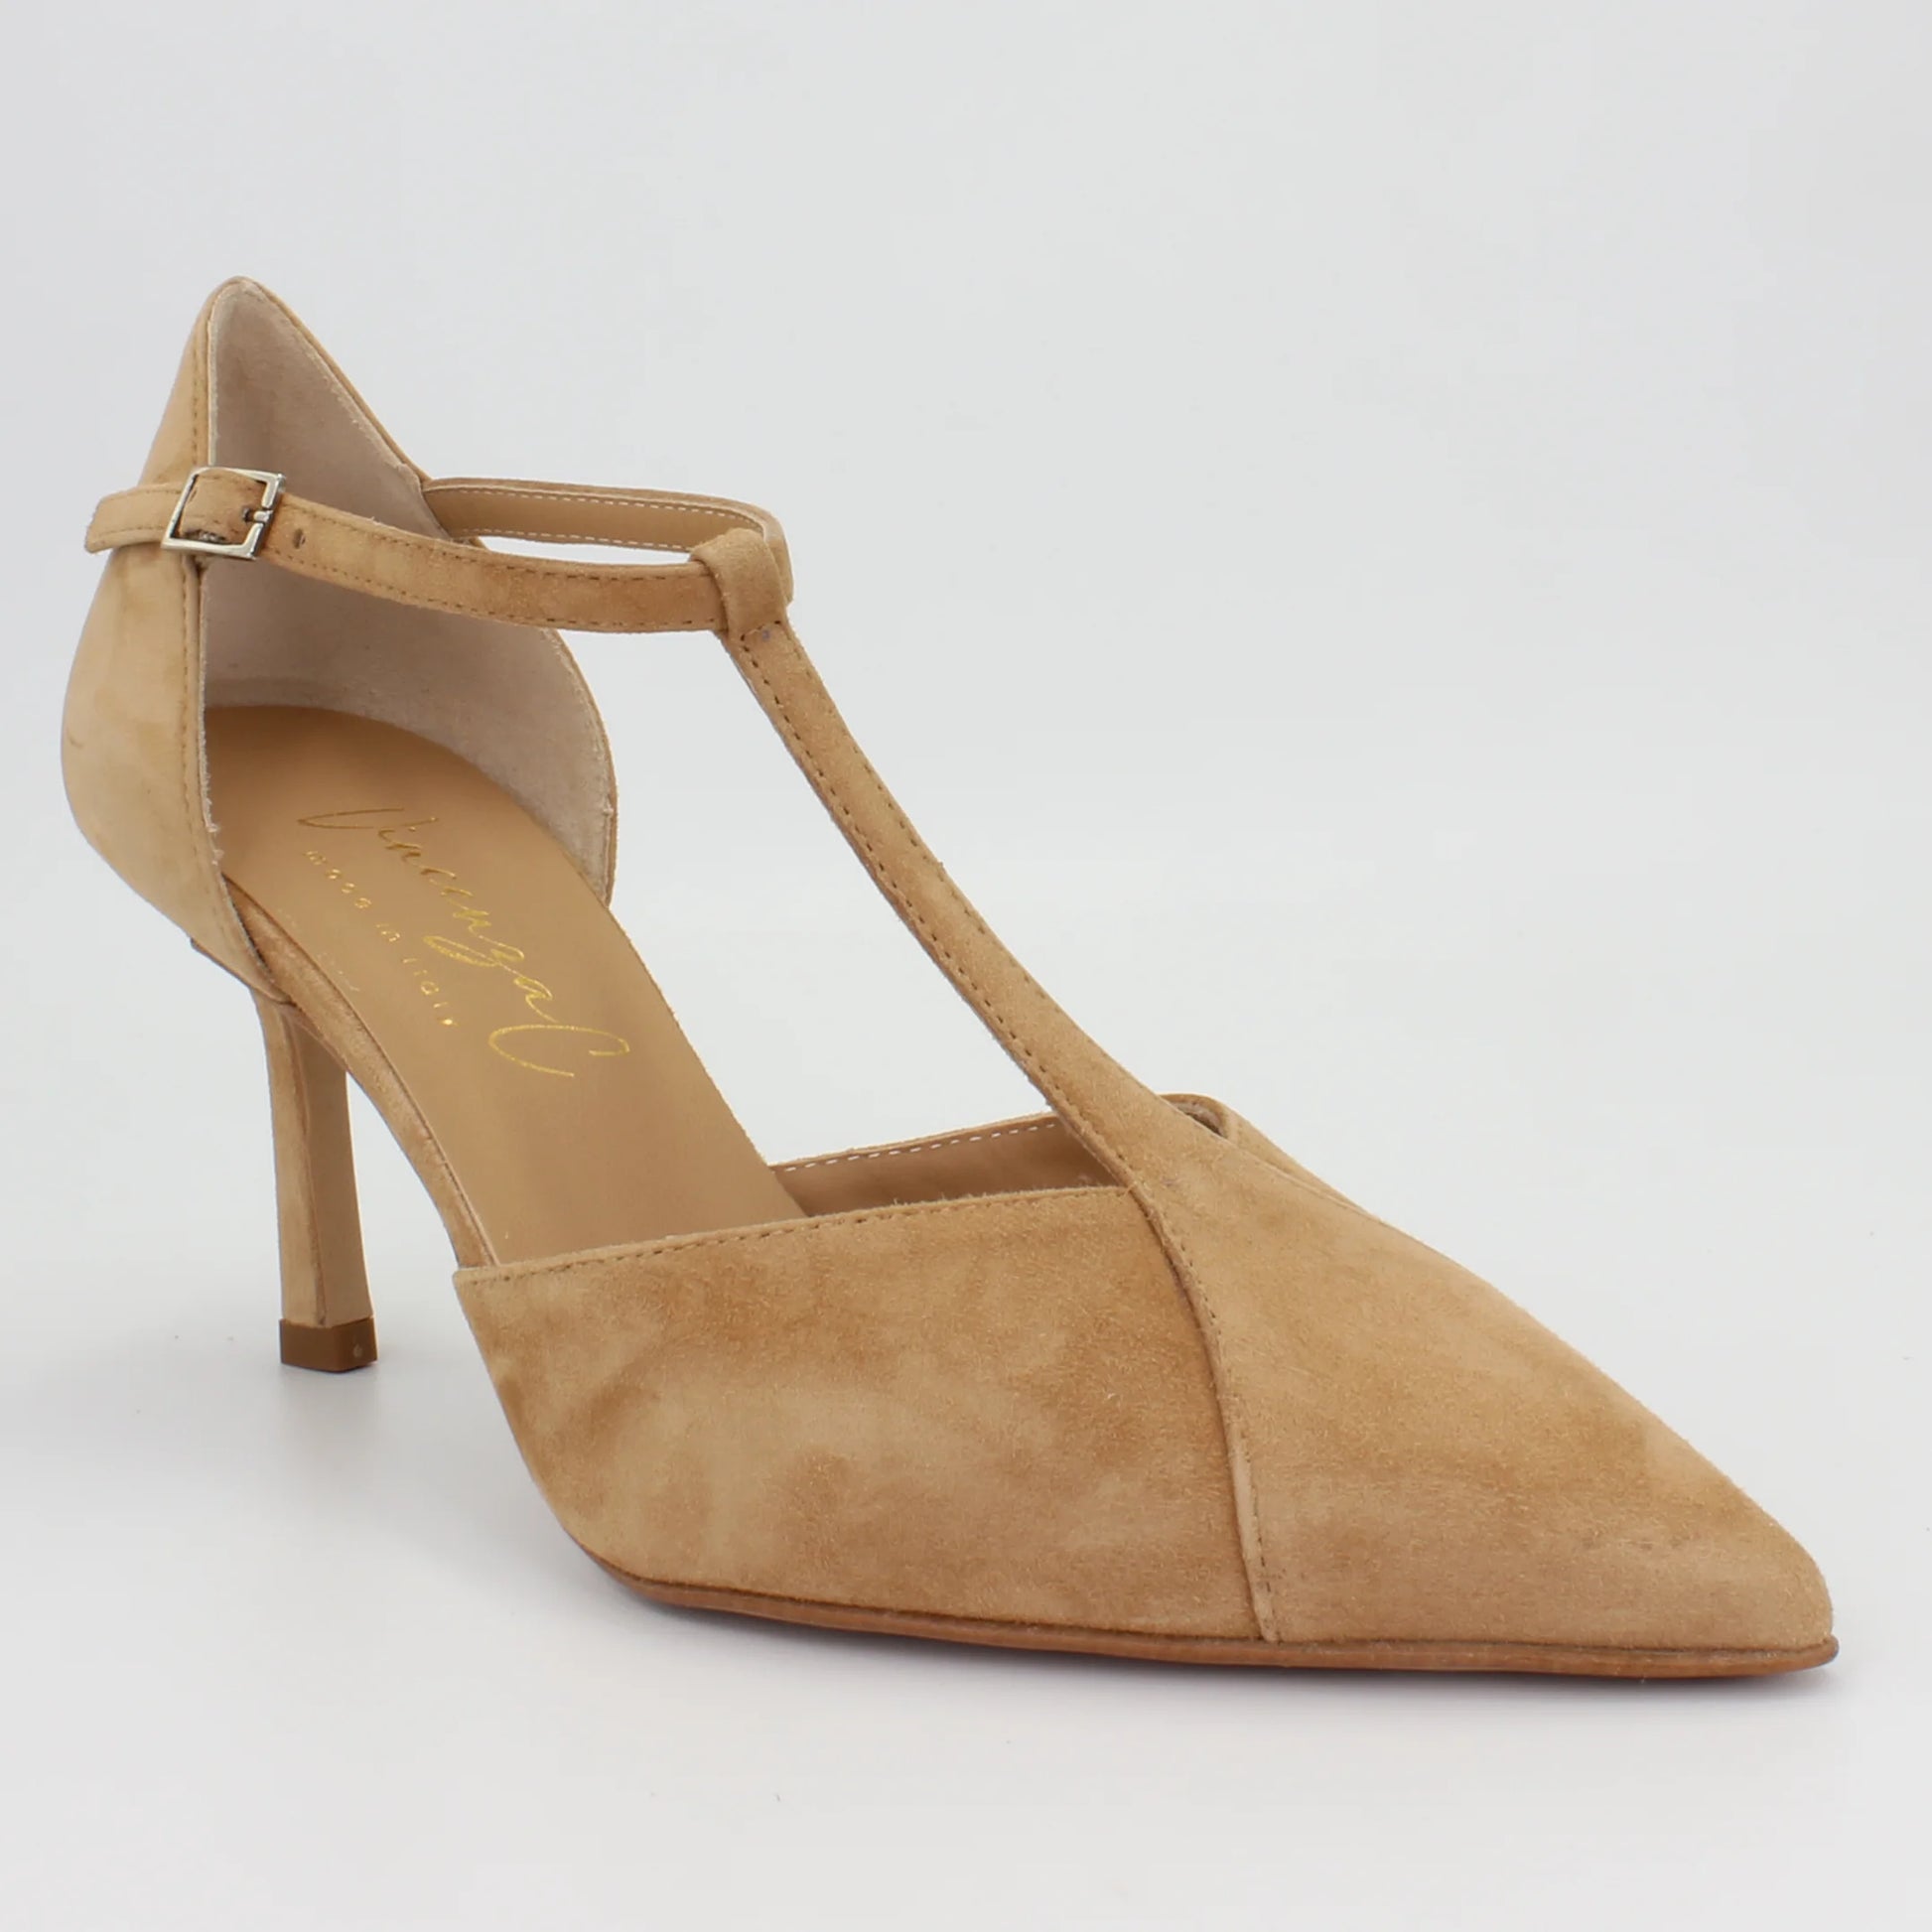 Shop Handmade Italian Leather Suede Mary Jane Legno (V17) or browse our range of hand-made Italian shoes for women in leather or suede in-store at Aliverti Cape Town, or shop online. We deliver in South Africa & offer multiple payment plans as well as accept multiple safe & secure payment methods.